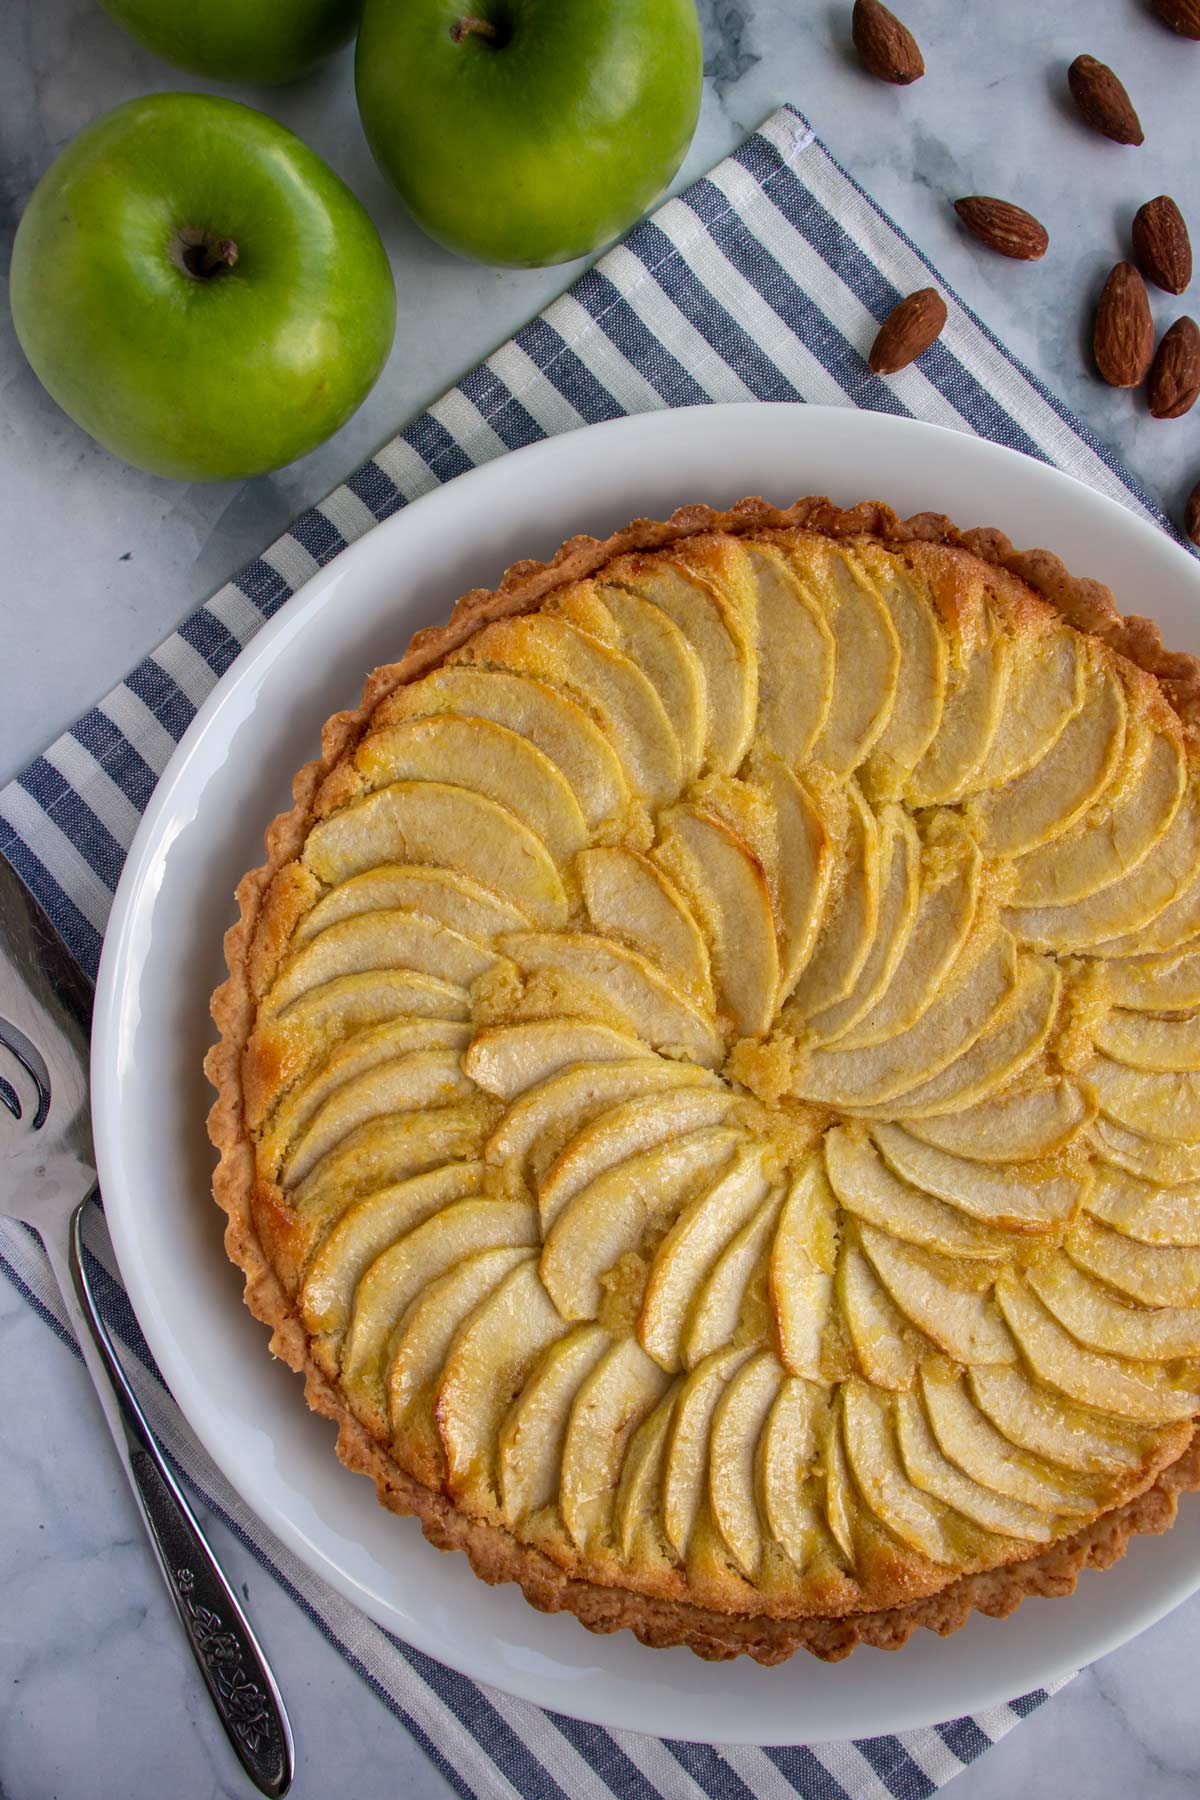 A tart with a spiral of sliced apples on top, with apples and almonds beside it.